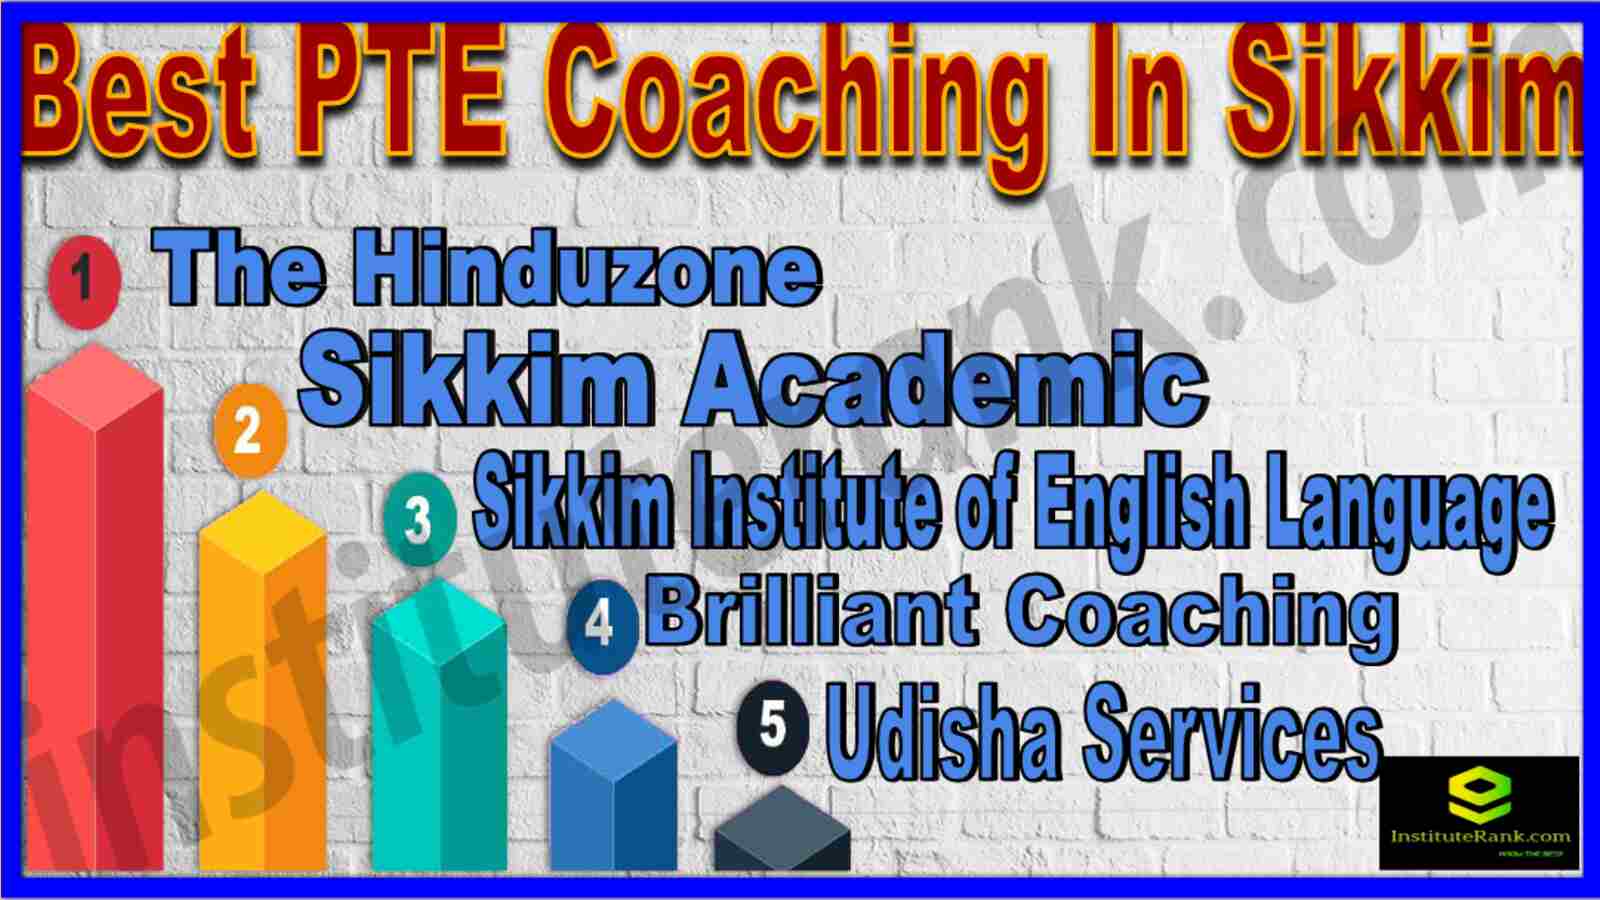 Best PTE Coaching in Sikkim